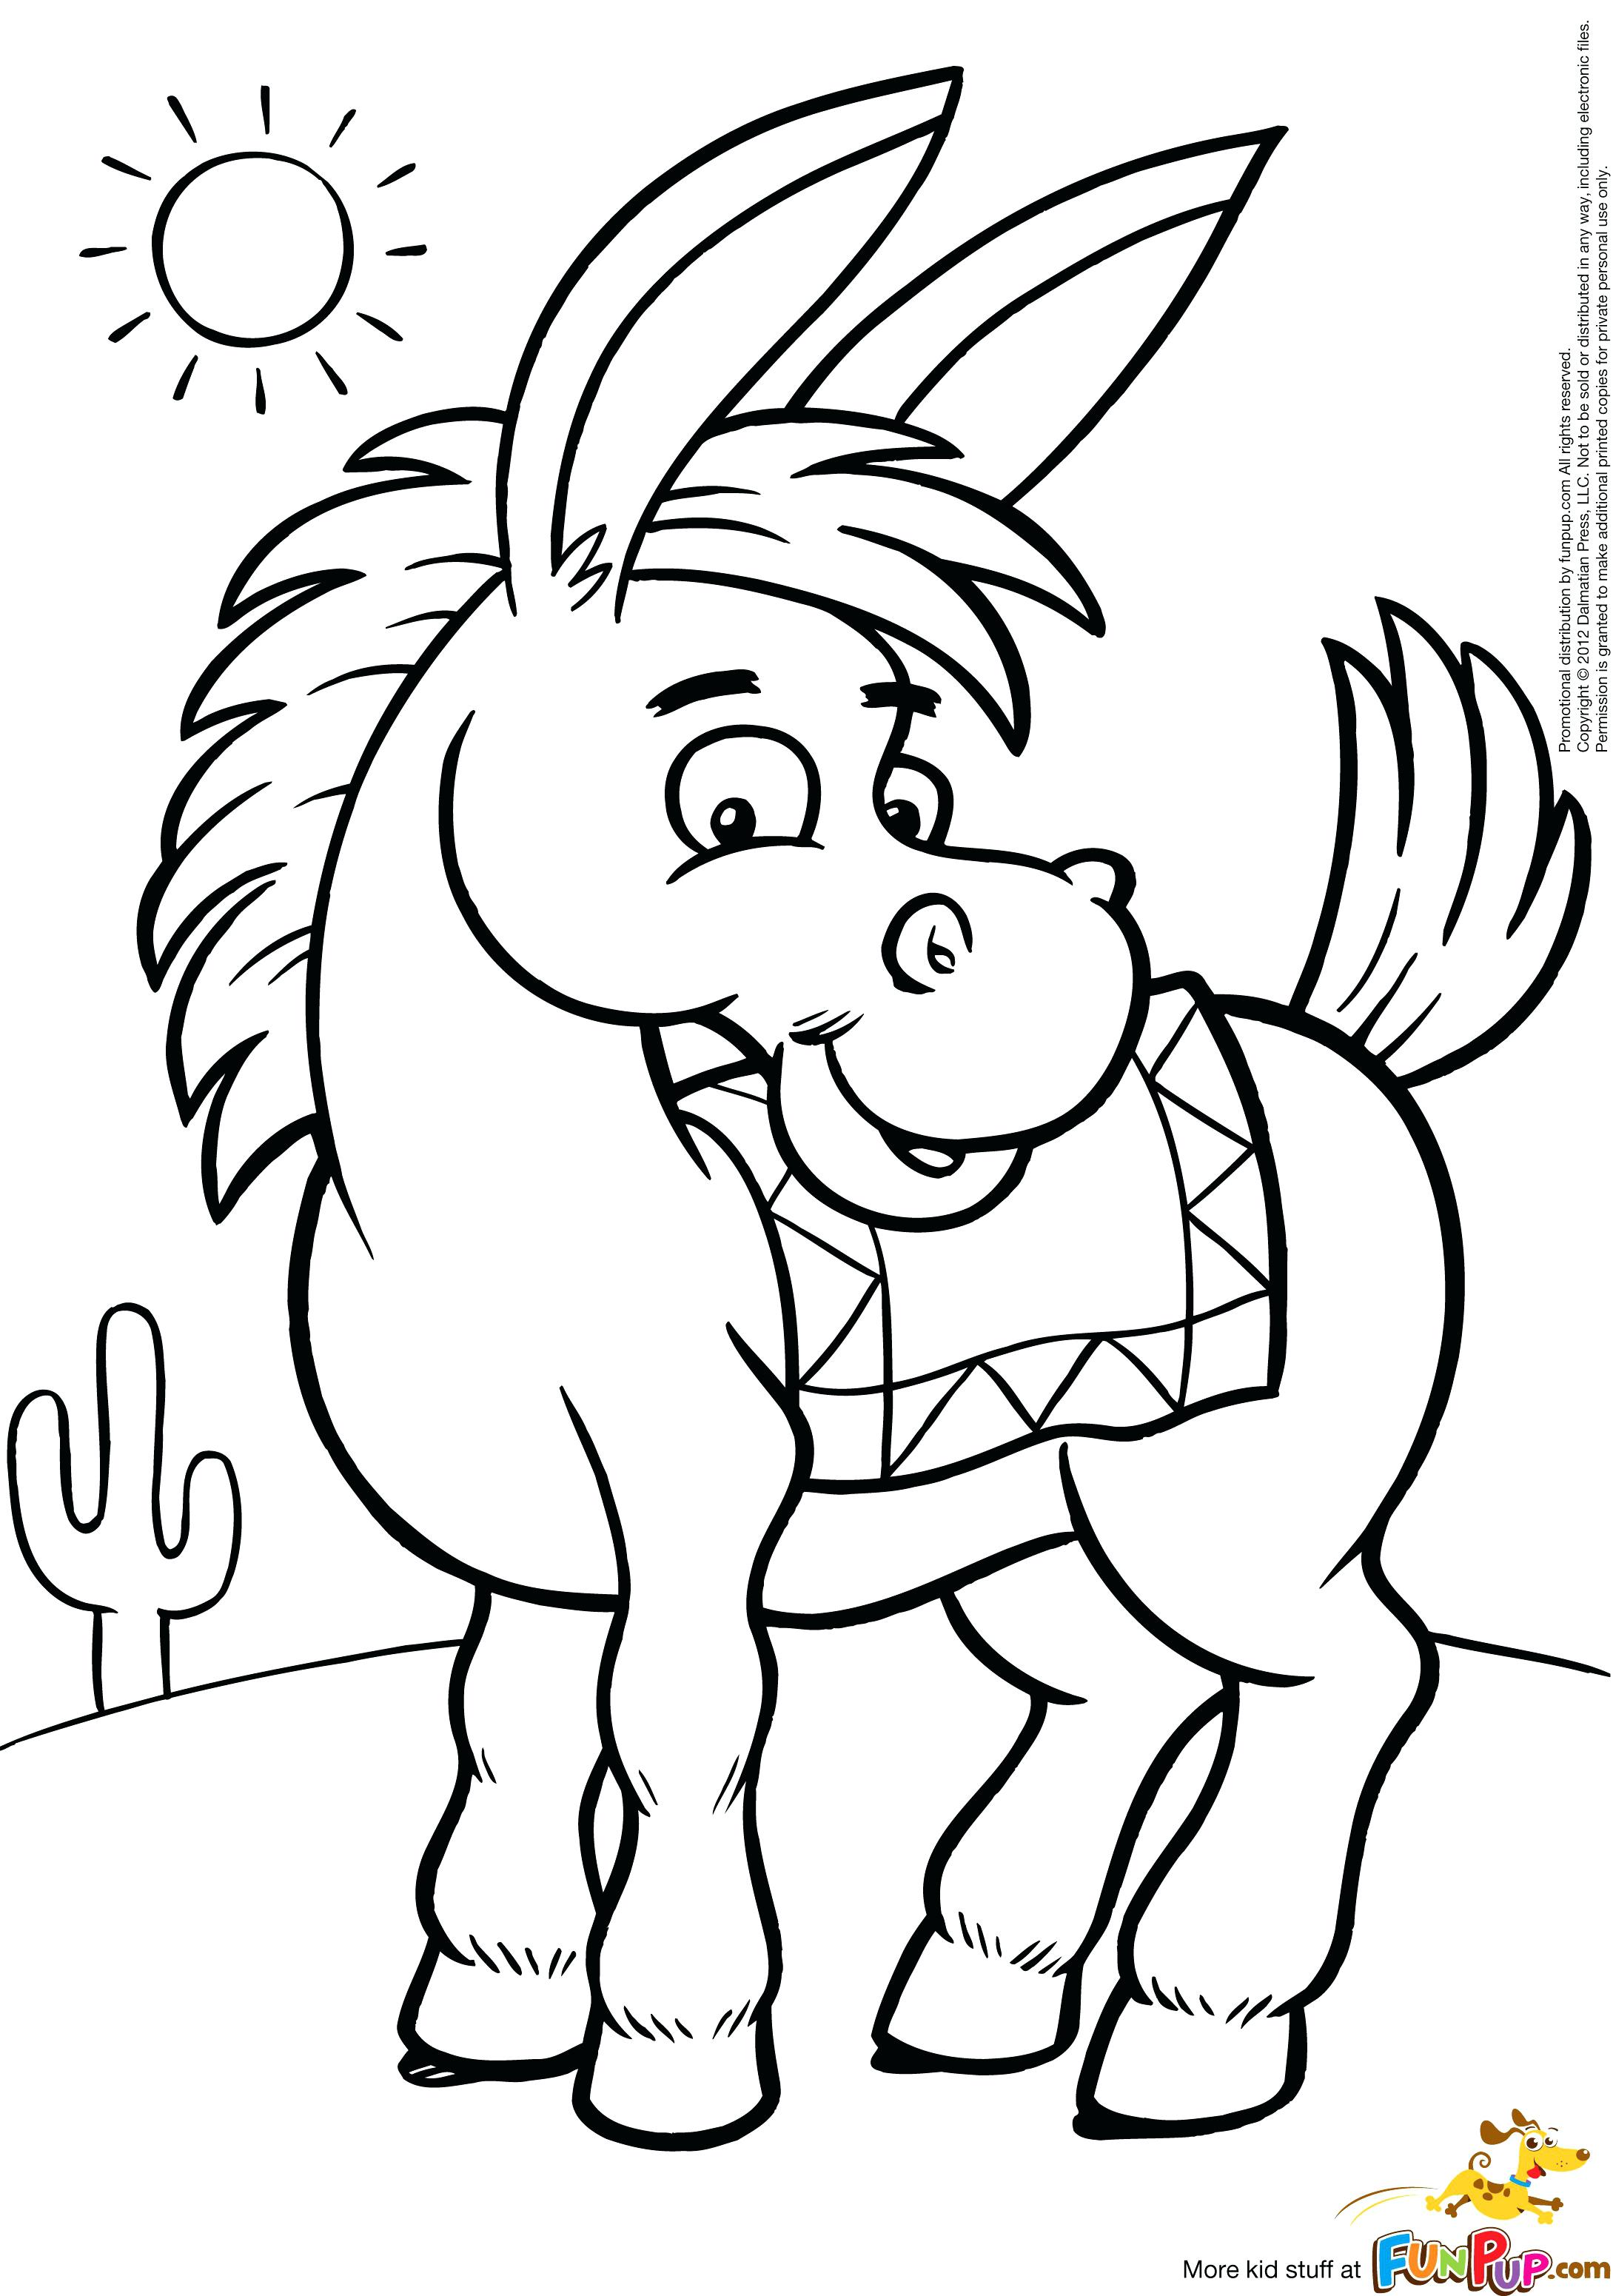 Country Western Coloring Pages At GetColorings Free Printable Colorings Pages To Print And